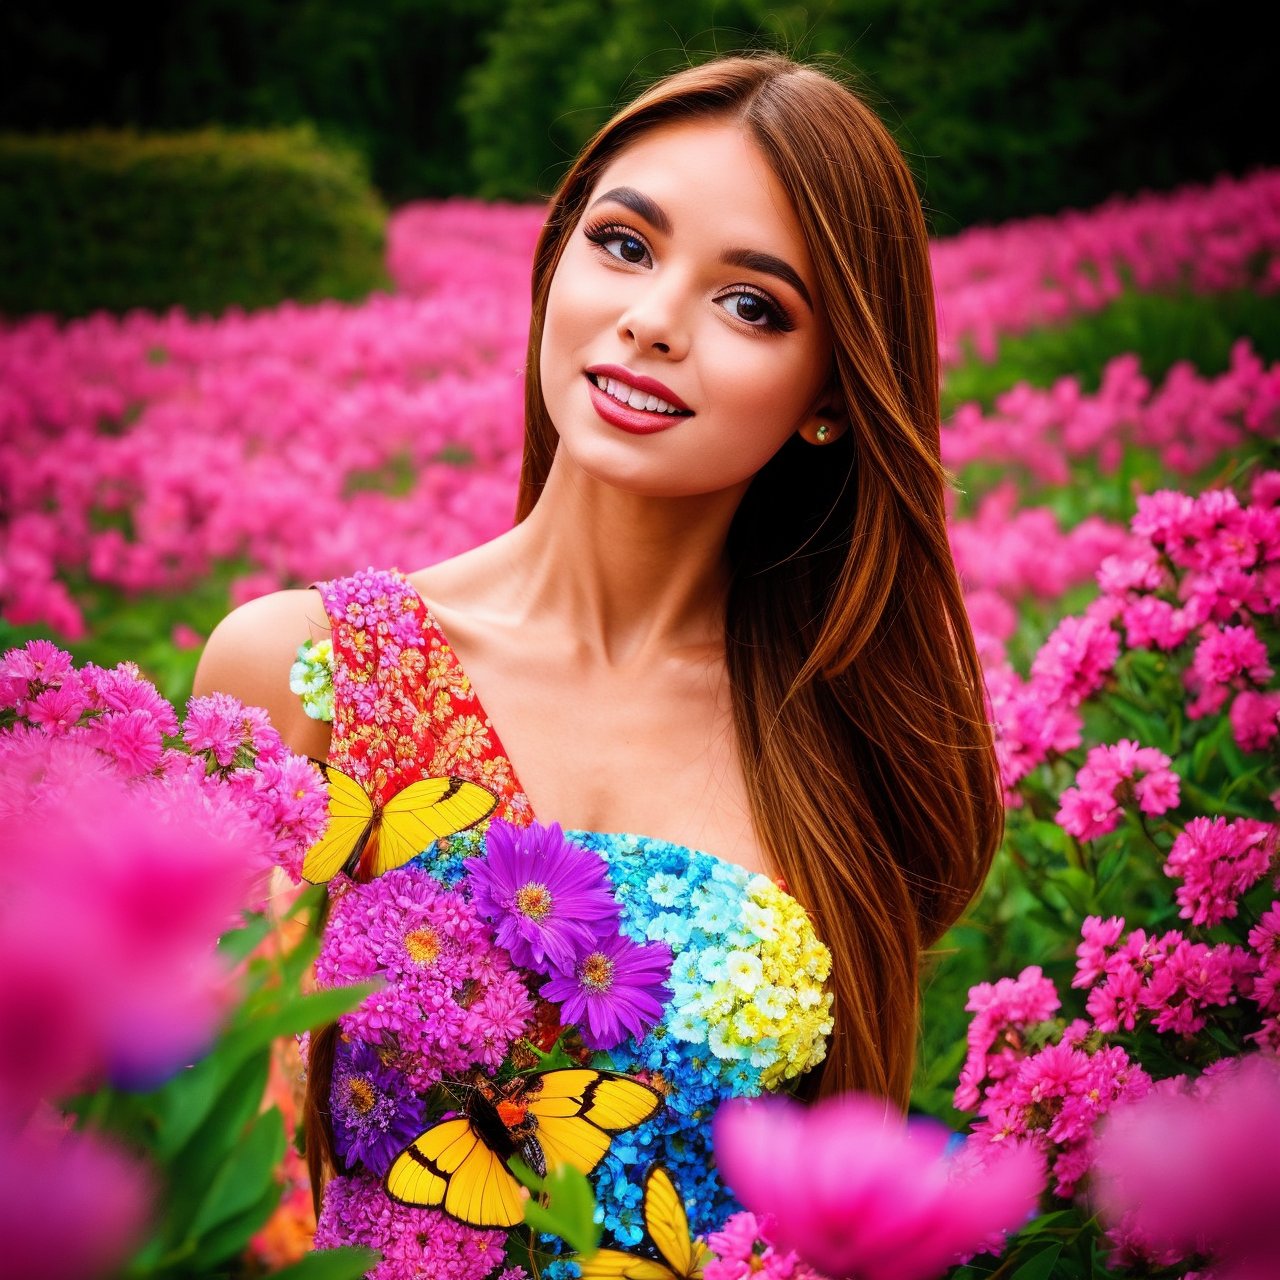 masterpice, (best quality), ((best detailed)), depth of field, a beautiful girl, beautiful face, nature, spirit, blossom, colorful landscape, flowers, butterflys, glowing dress, elements